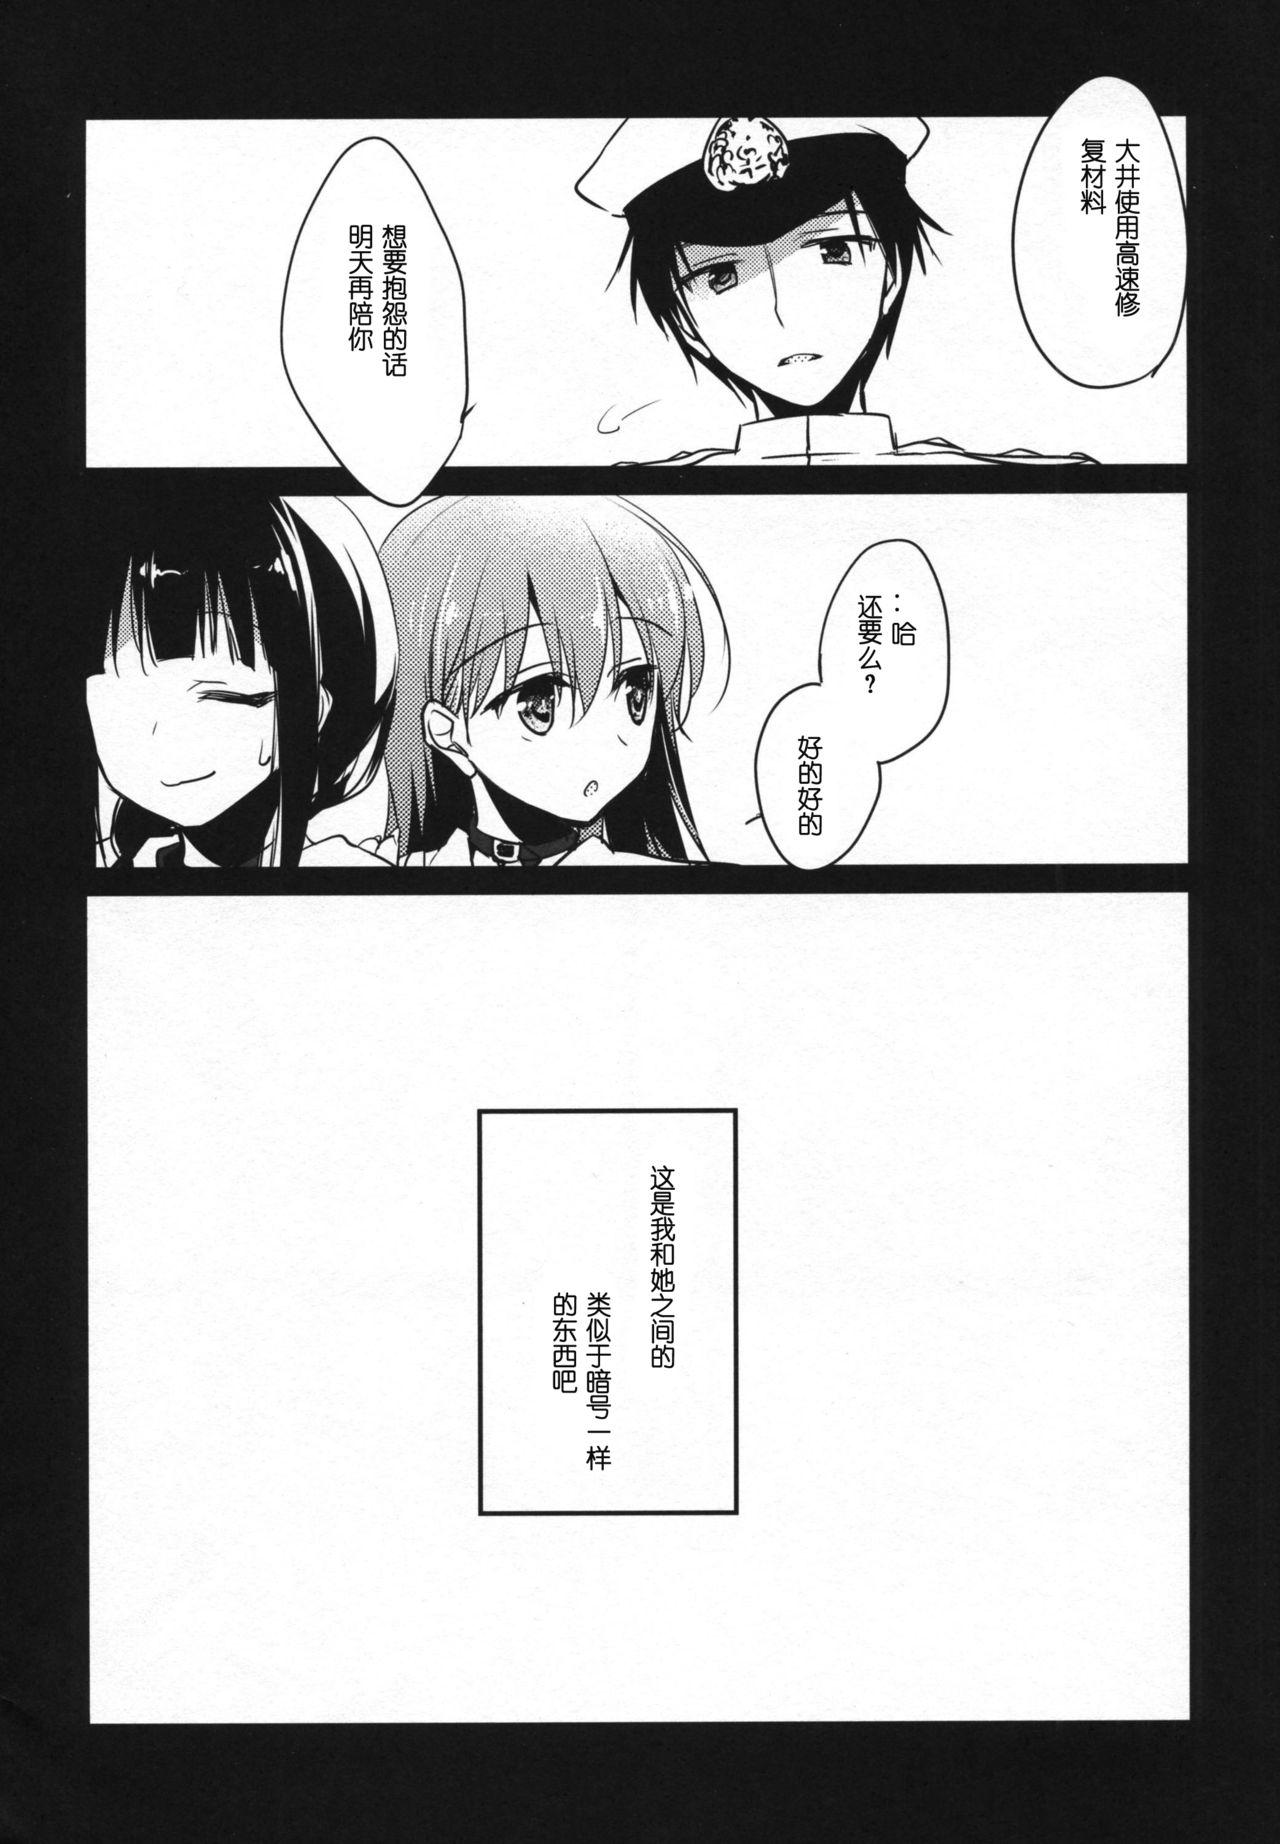 Chat 5minutesEscape - Kantai collection Body - Page 7